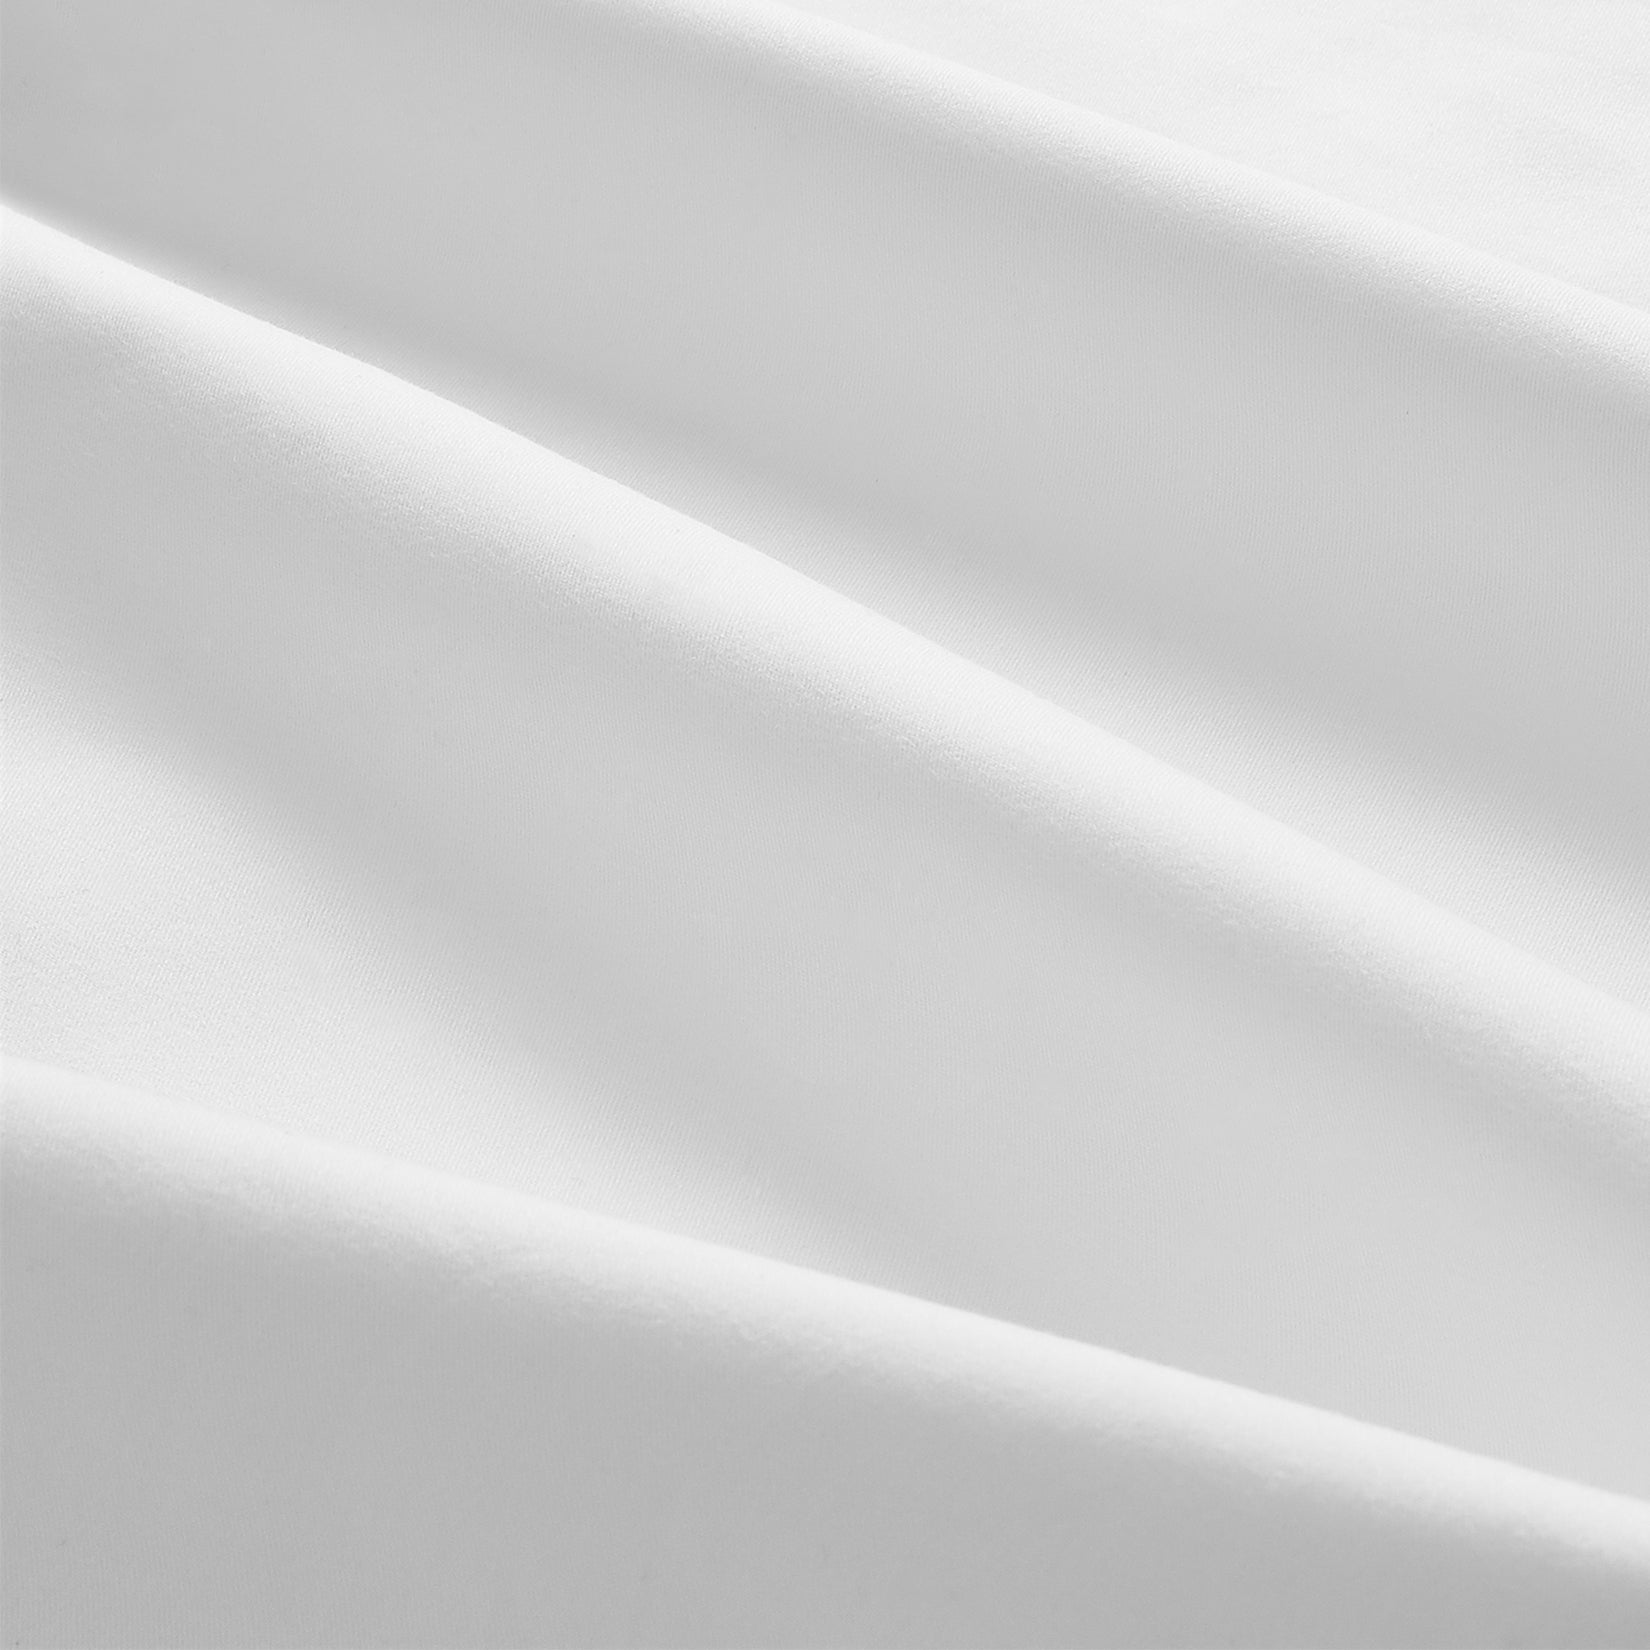 Close up details of Camille Classic White Pleated Cotton Sheet Set. White bedsheet set close up.